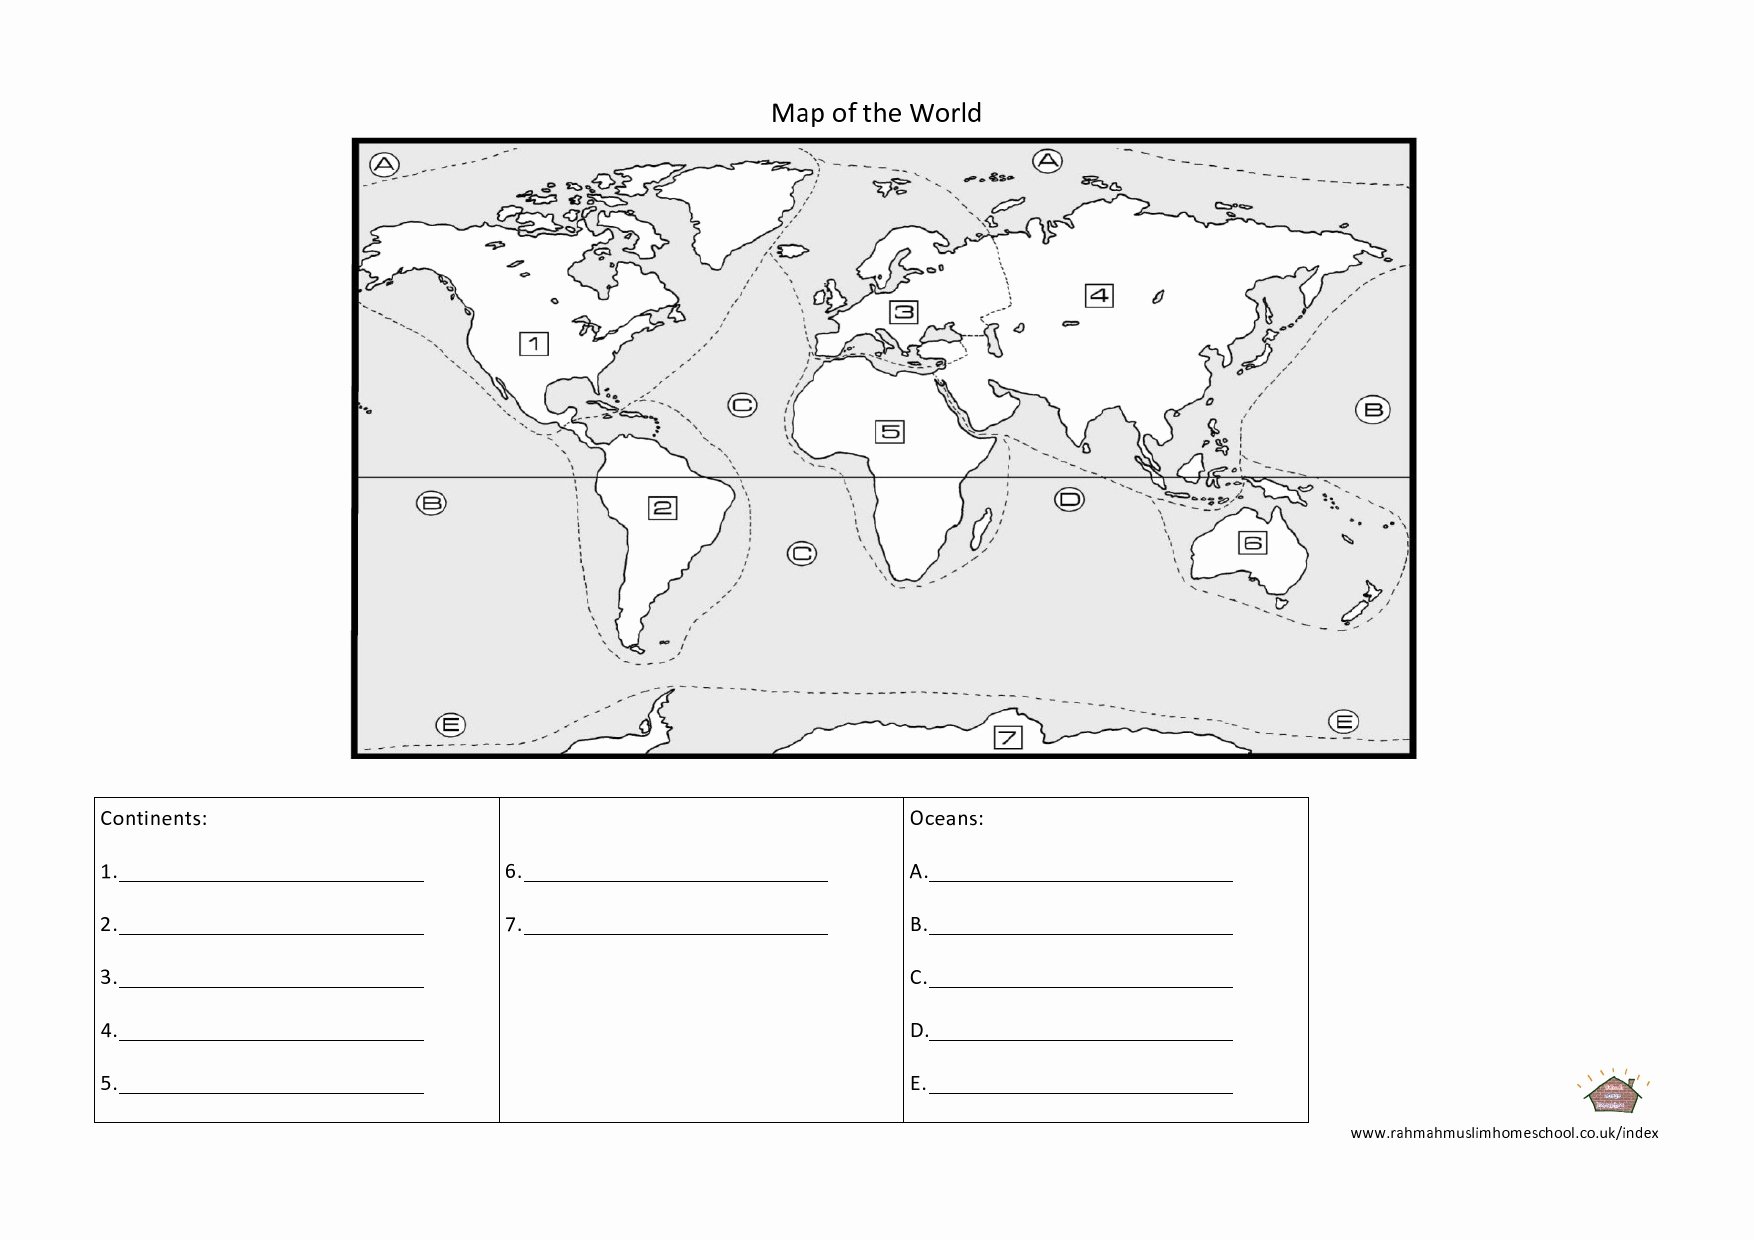 Continents and Oceans Worksheet Inspirational Geography Continents and Oceans Worksheet